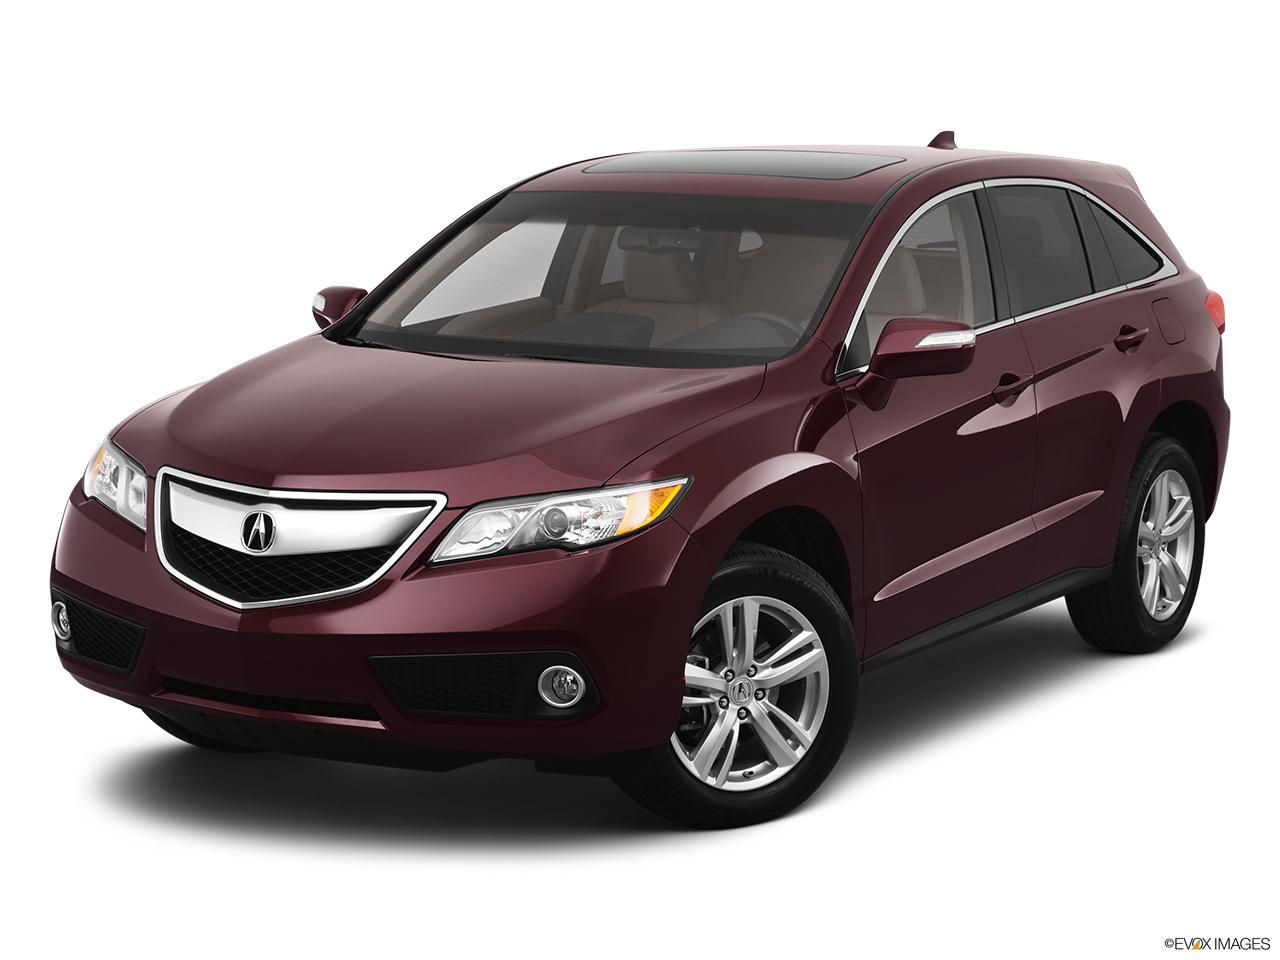 2013 Acura RDX AWD Front angle view. 